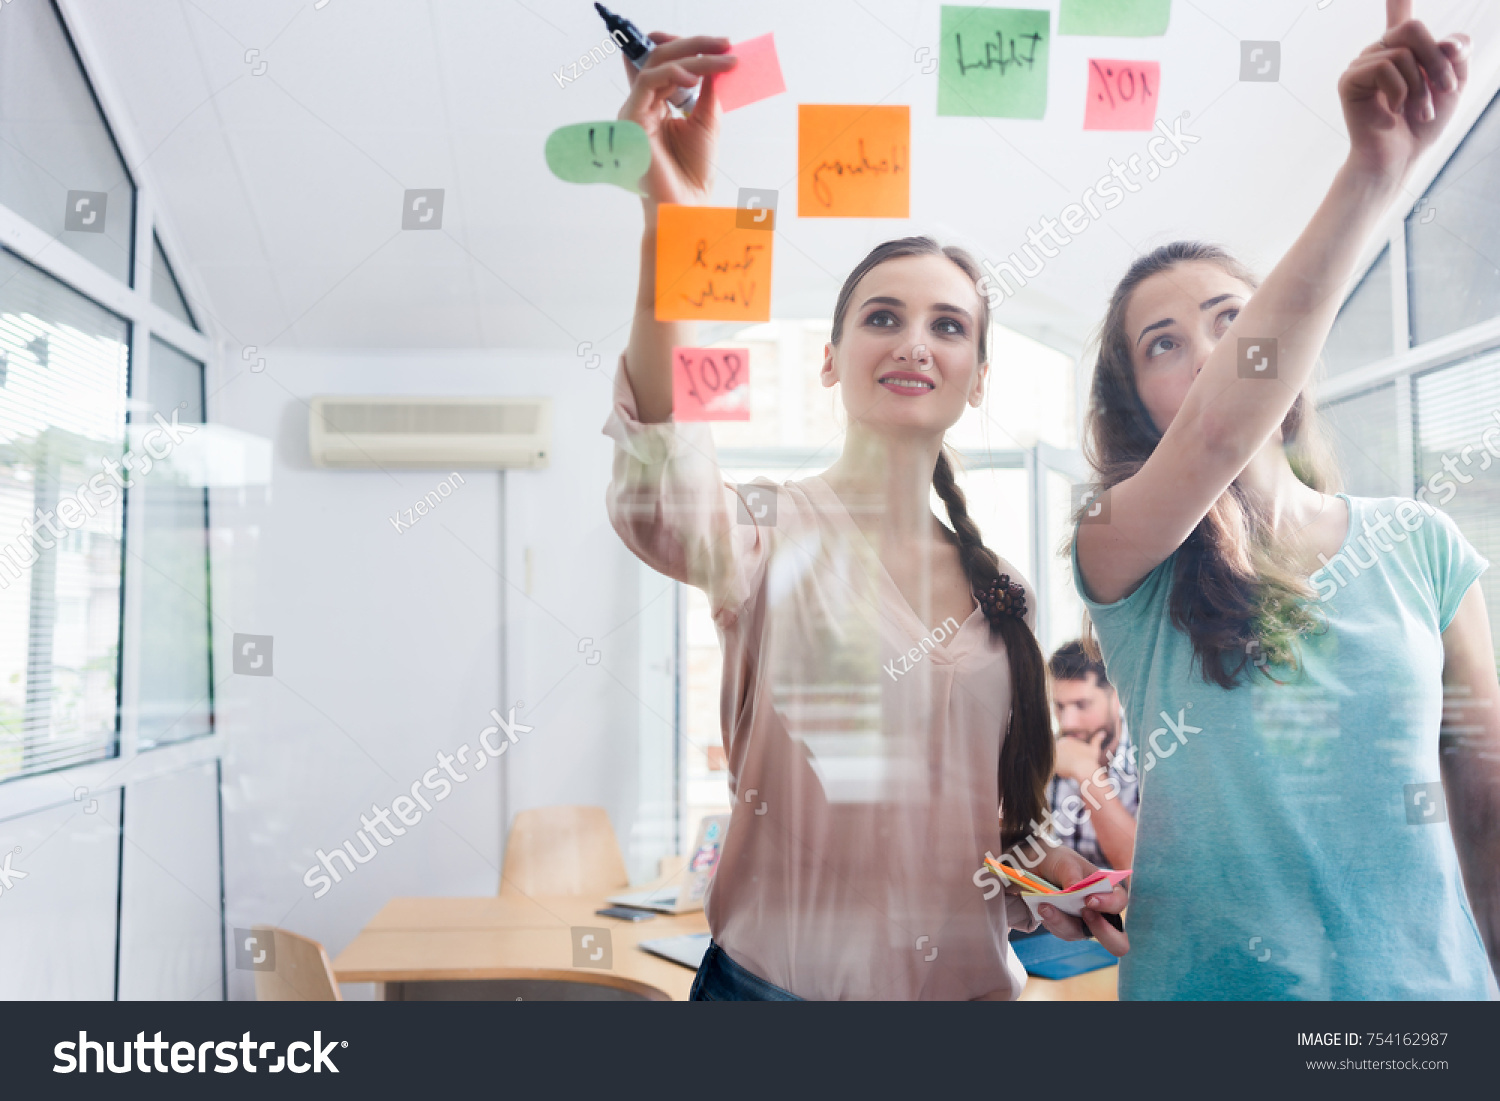 Two proficient female co-workers posting sticky notes in the interior of a shared office space for task prioritization and better time management #754162987